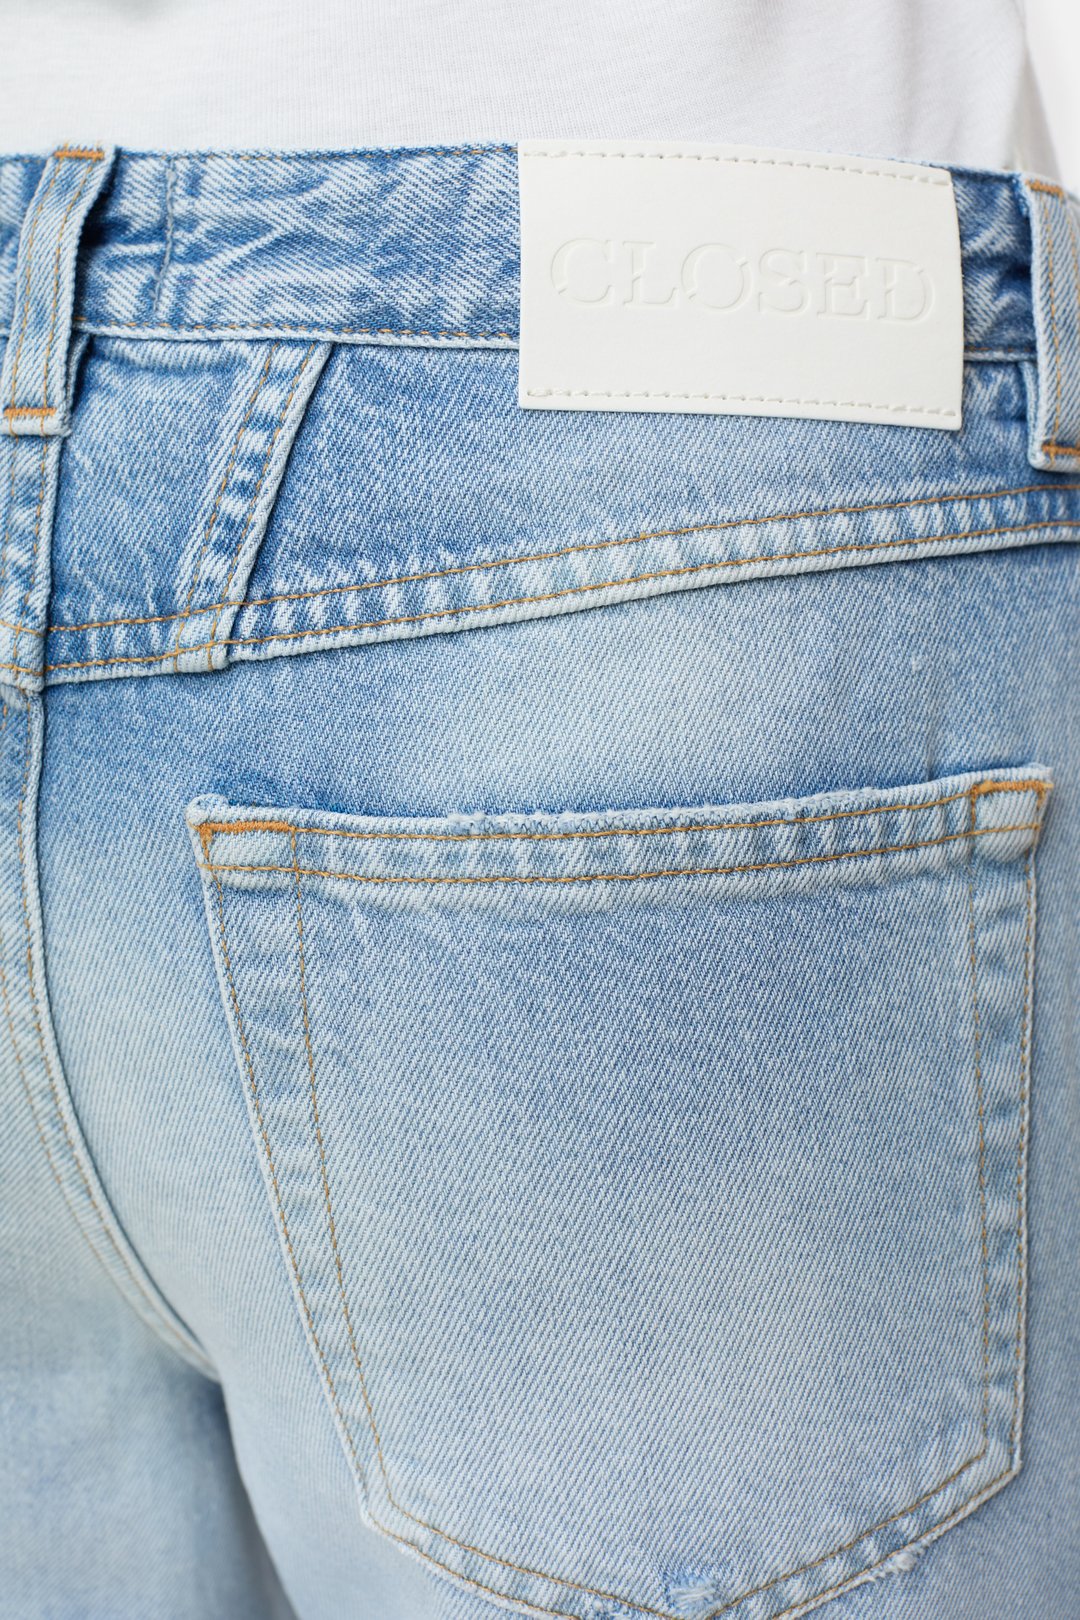 Jeans Gillan in Light BlueClosed - Anita Hass